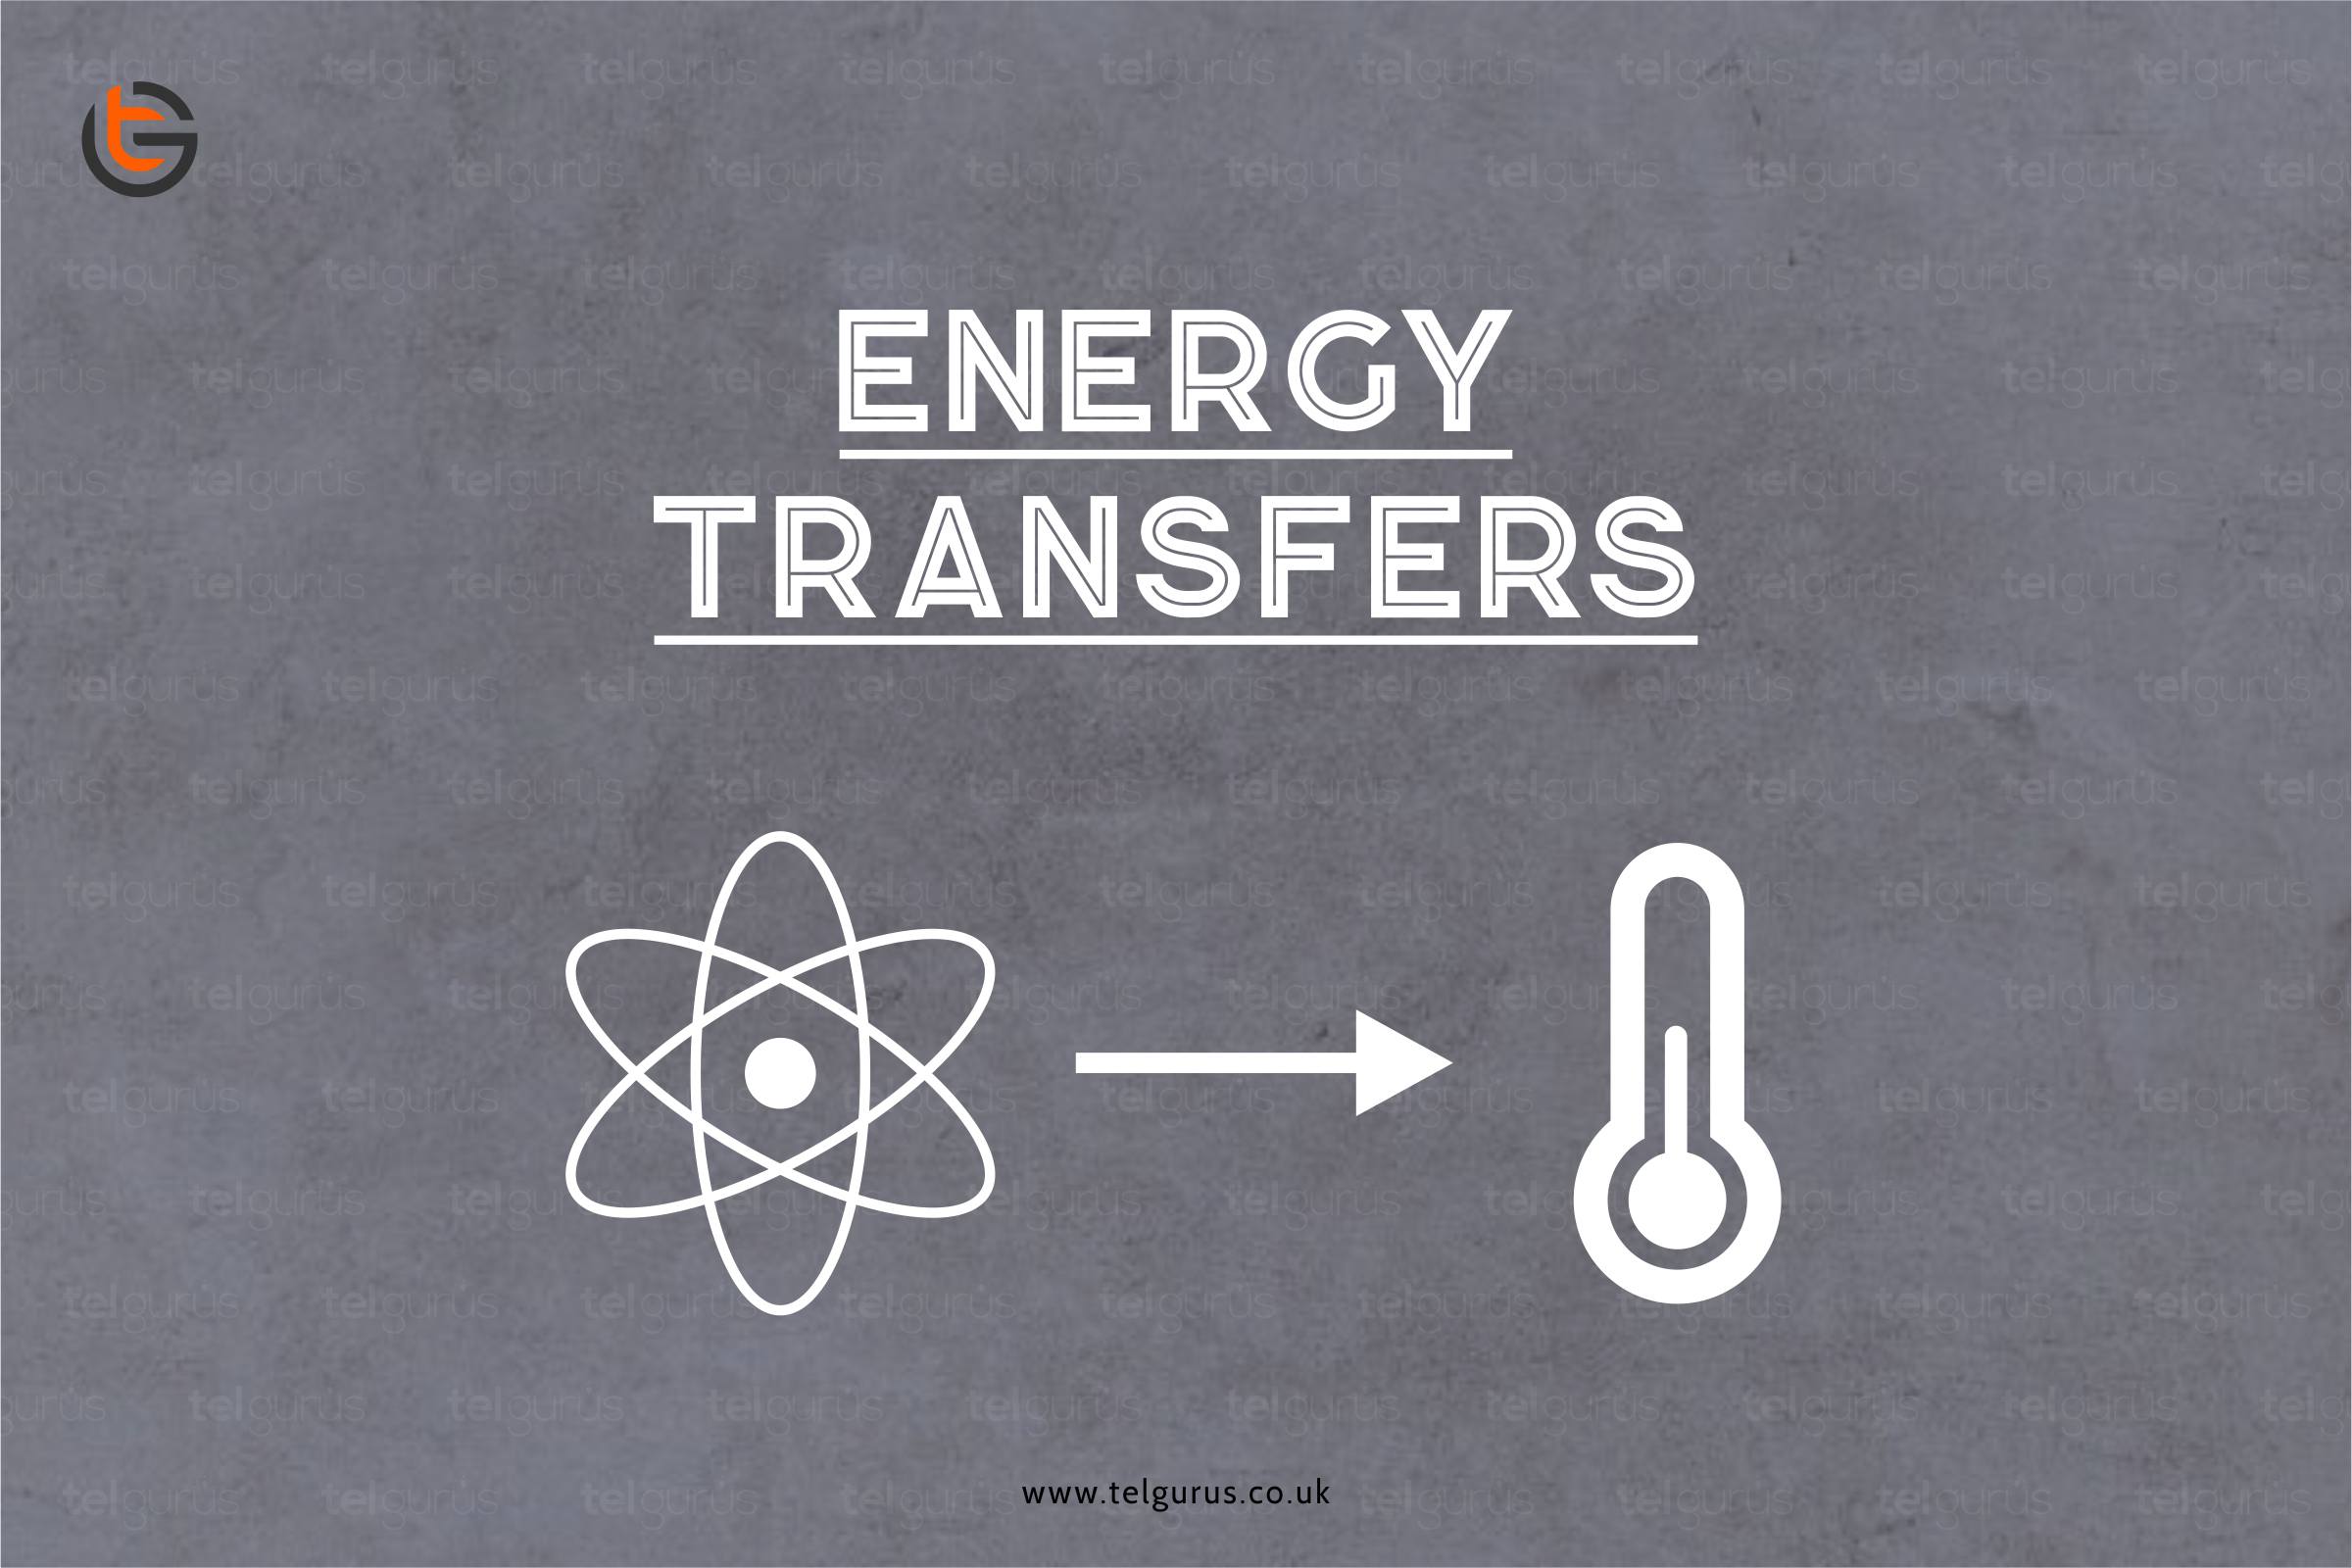 What are the different ways that energy can be transferred?